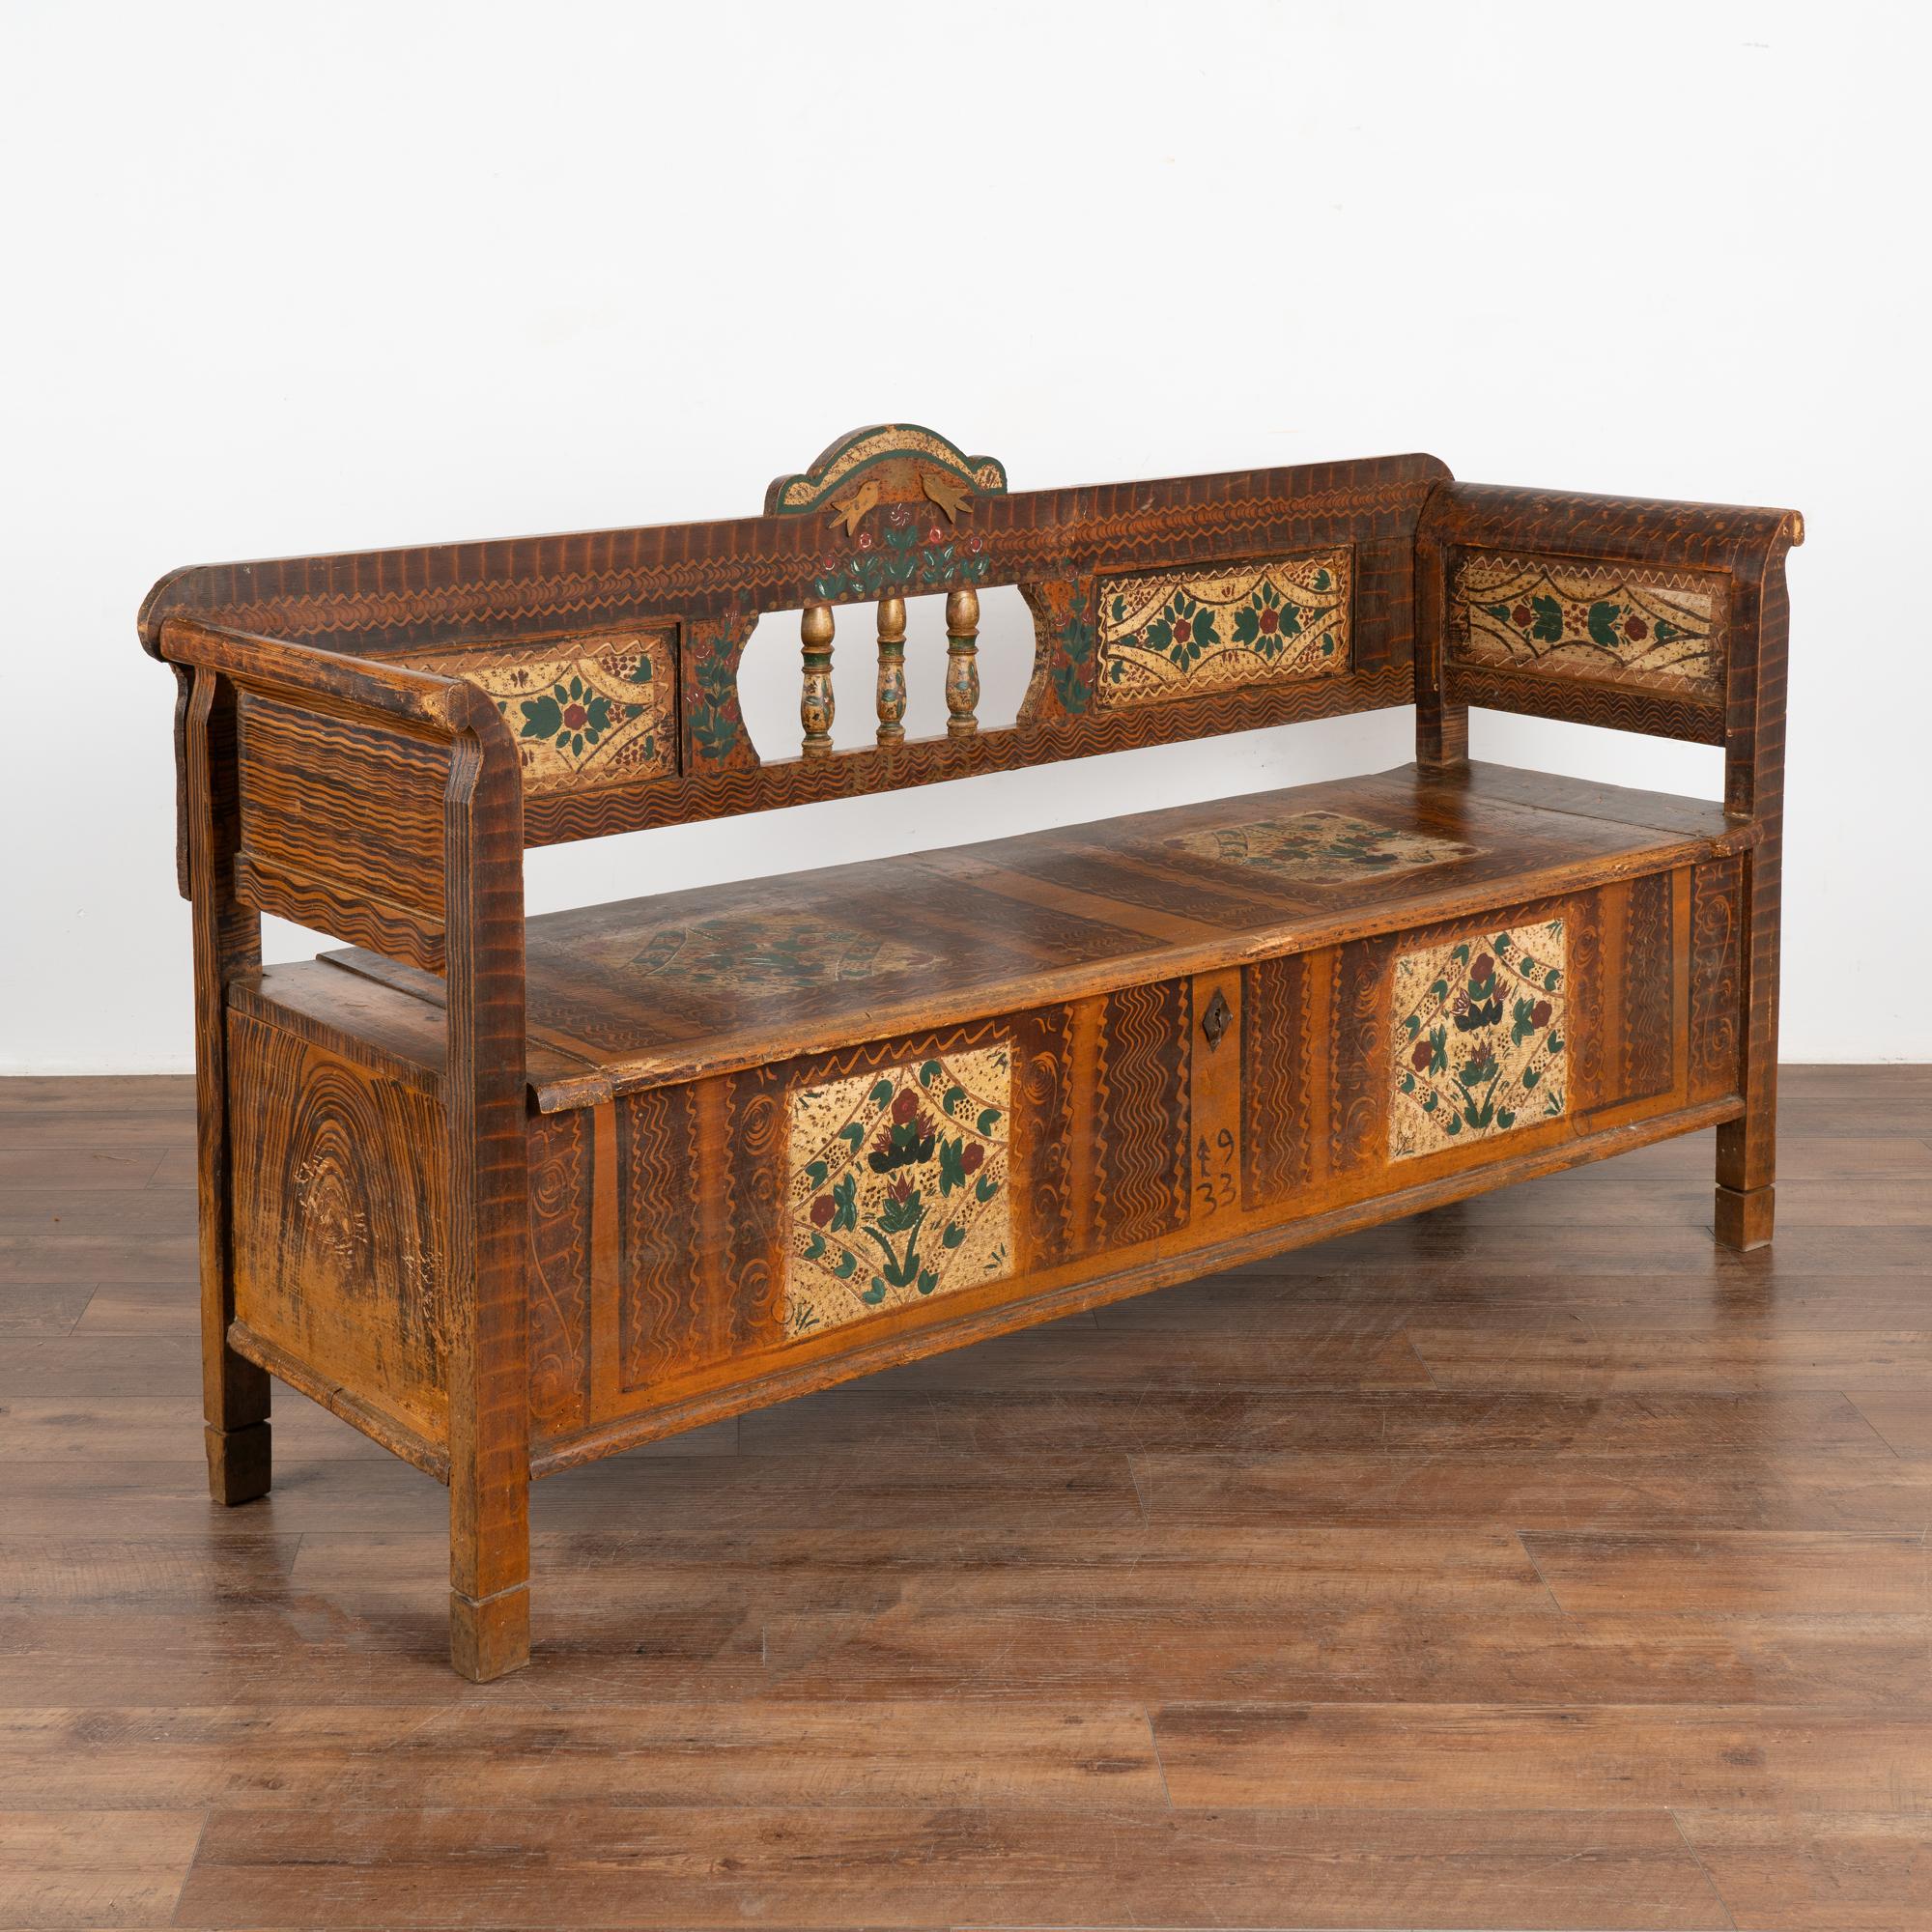 Original hand painted folk art pine bench displays exceptional traditional brown faux wood background and colorful green and red floral displays within painted panels along the front, seat, back and sides. 
Note the decorative carved birds and